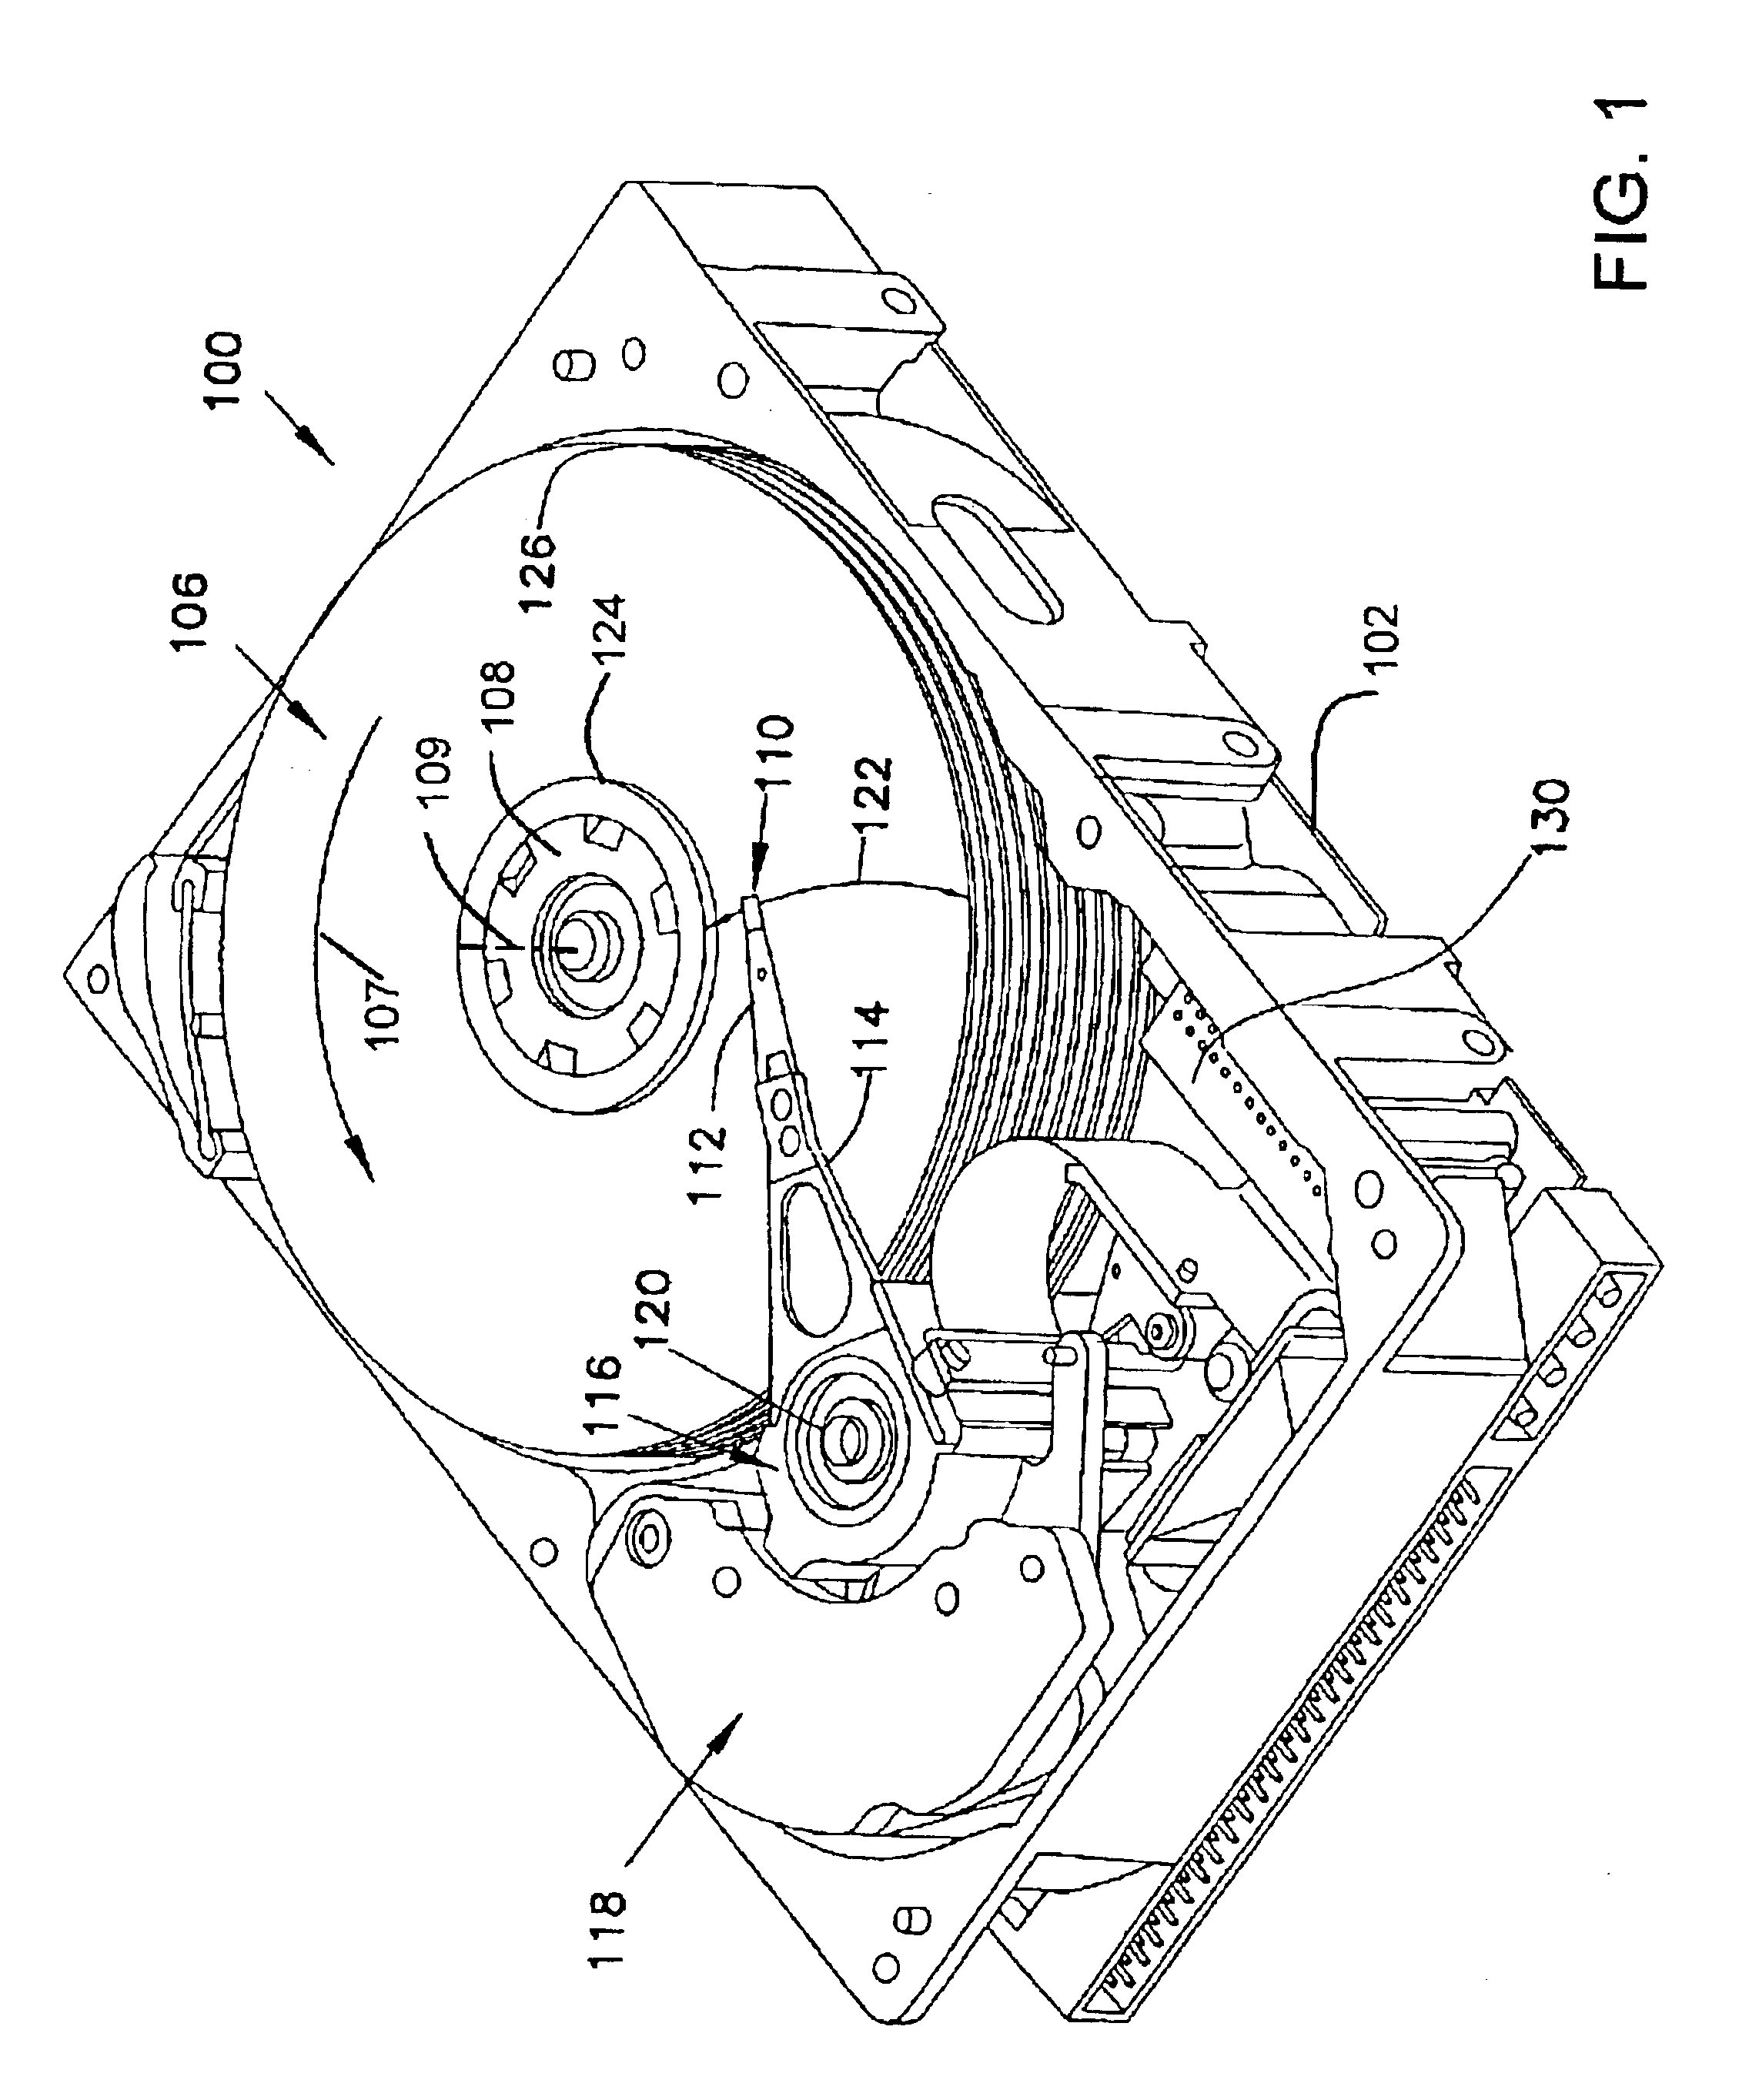 Adjustment of pole frequency and boost settings of a filter in a channel